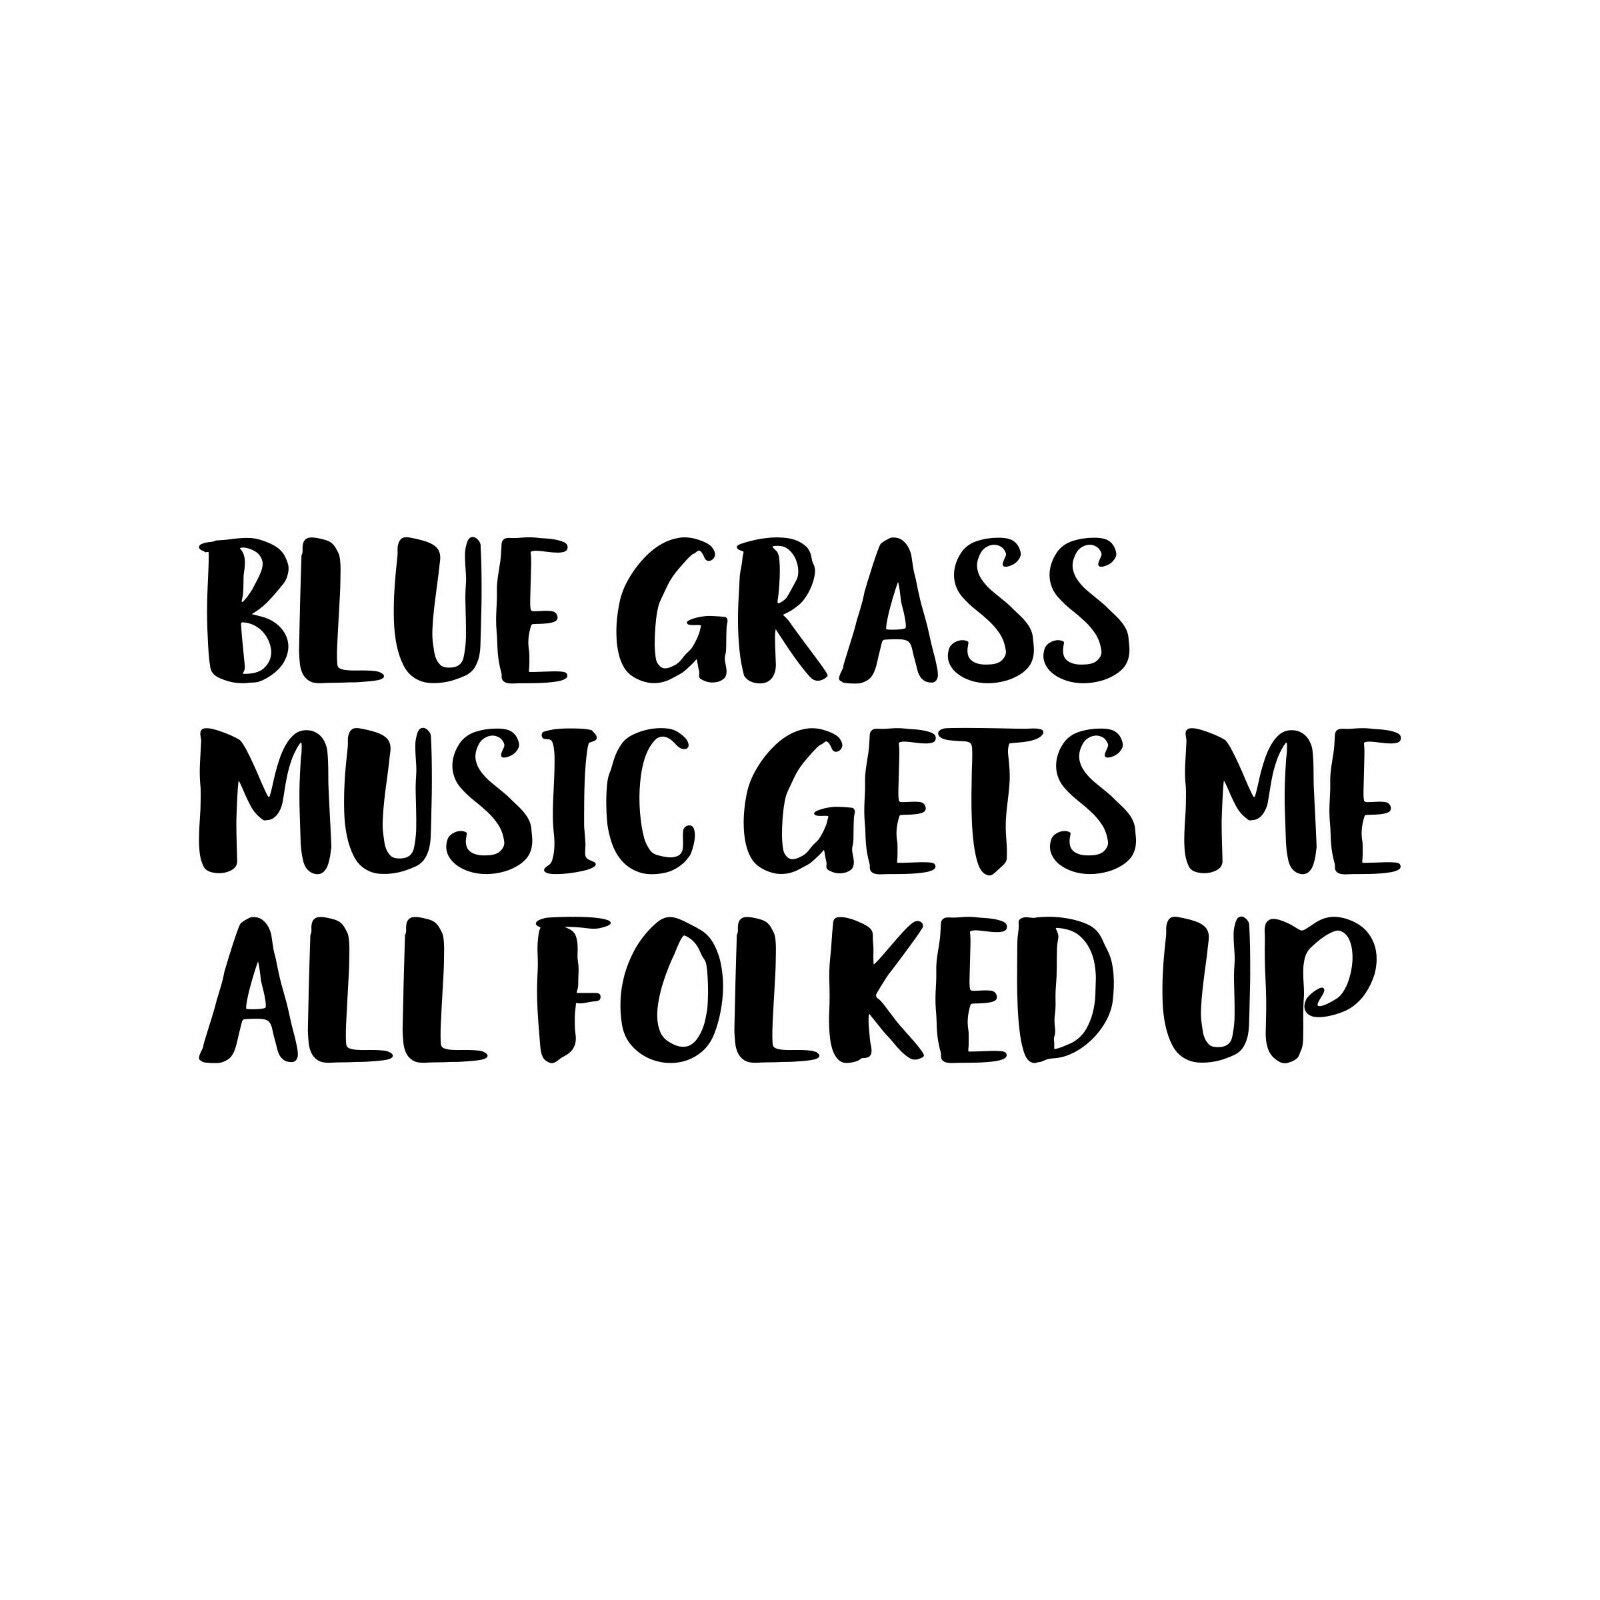 Blue Grass Music Gets Me All Folked Up 6 or 12 Vinyl Decal Sticker